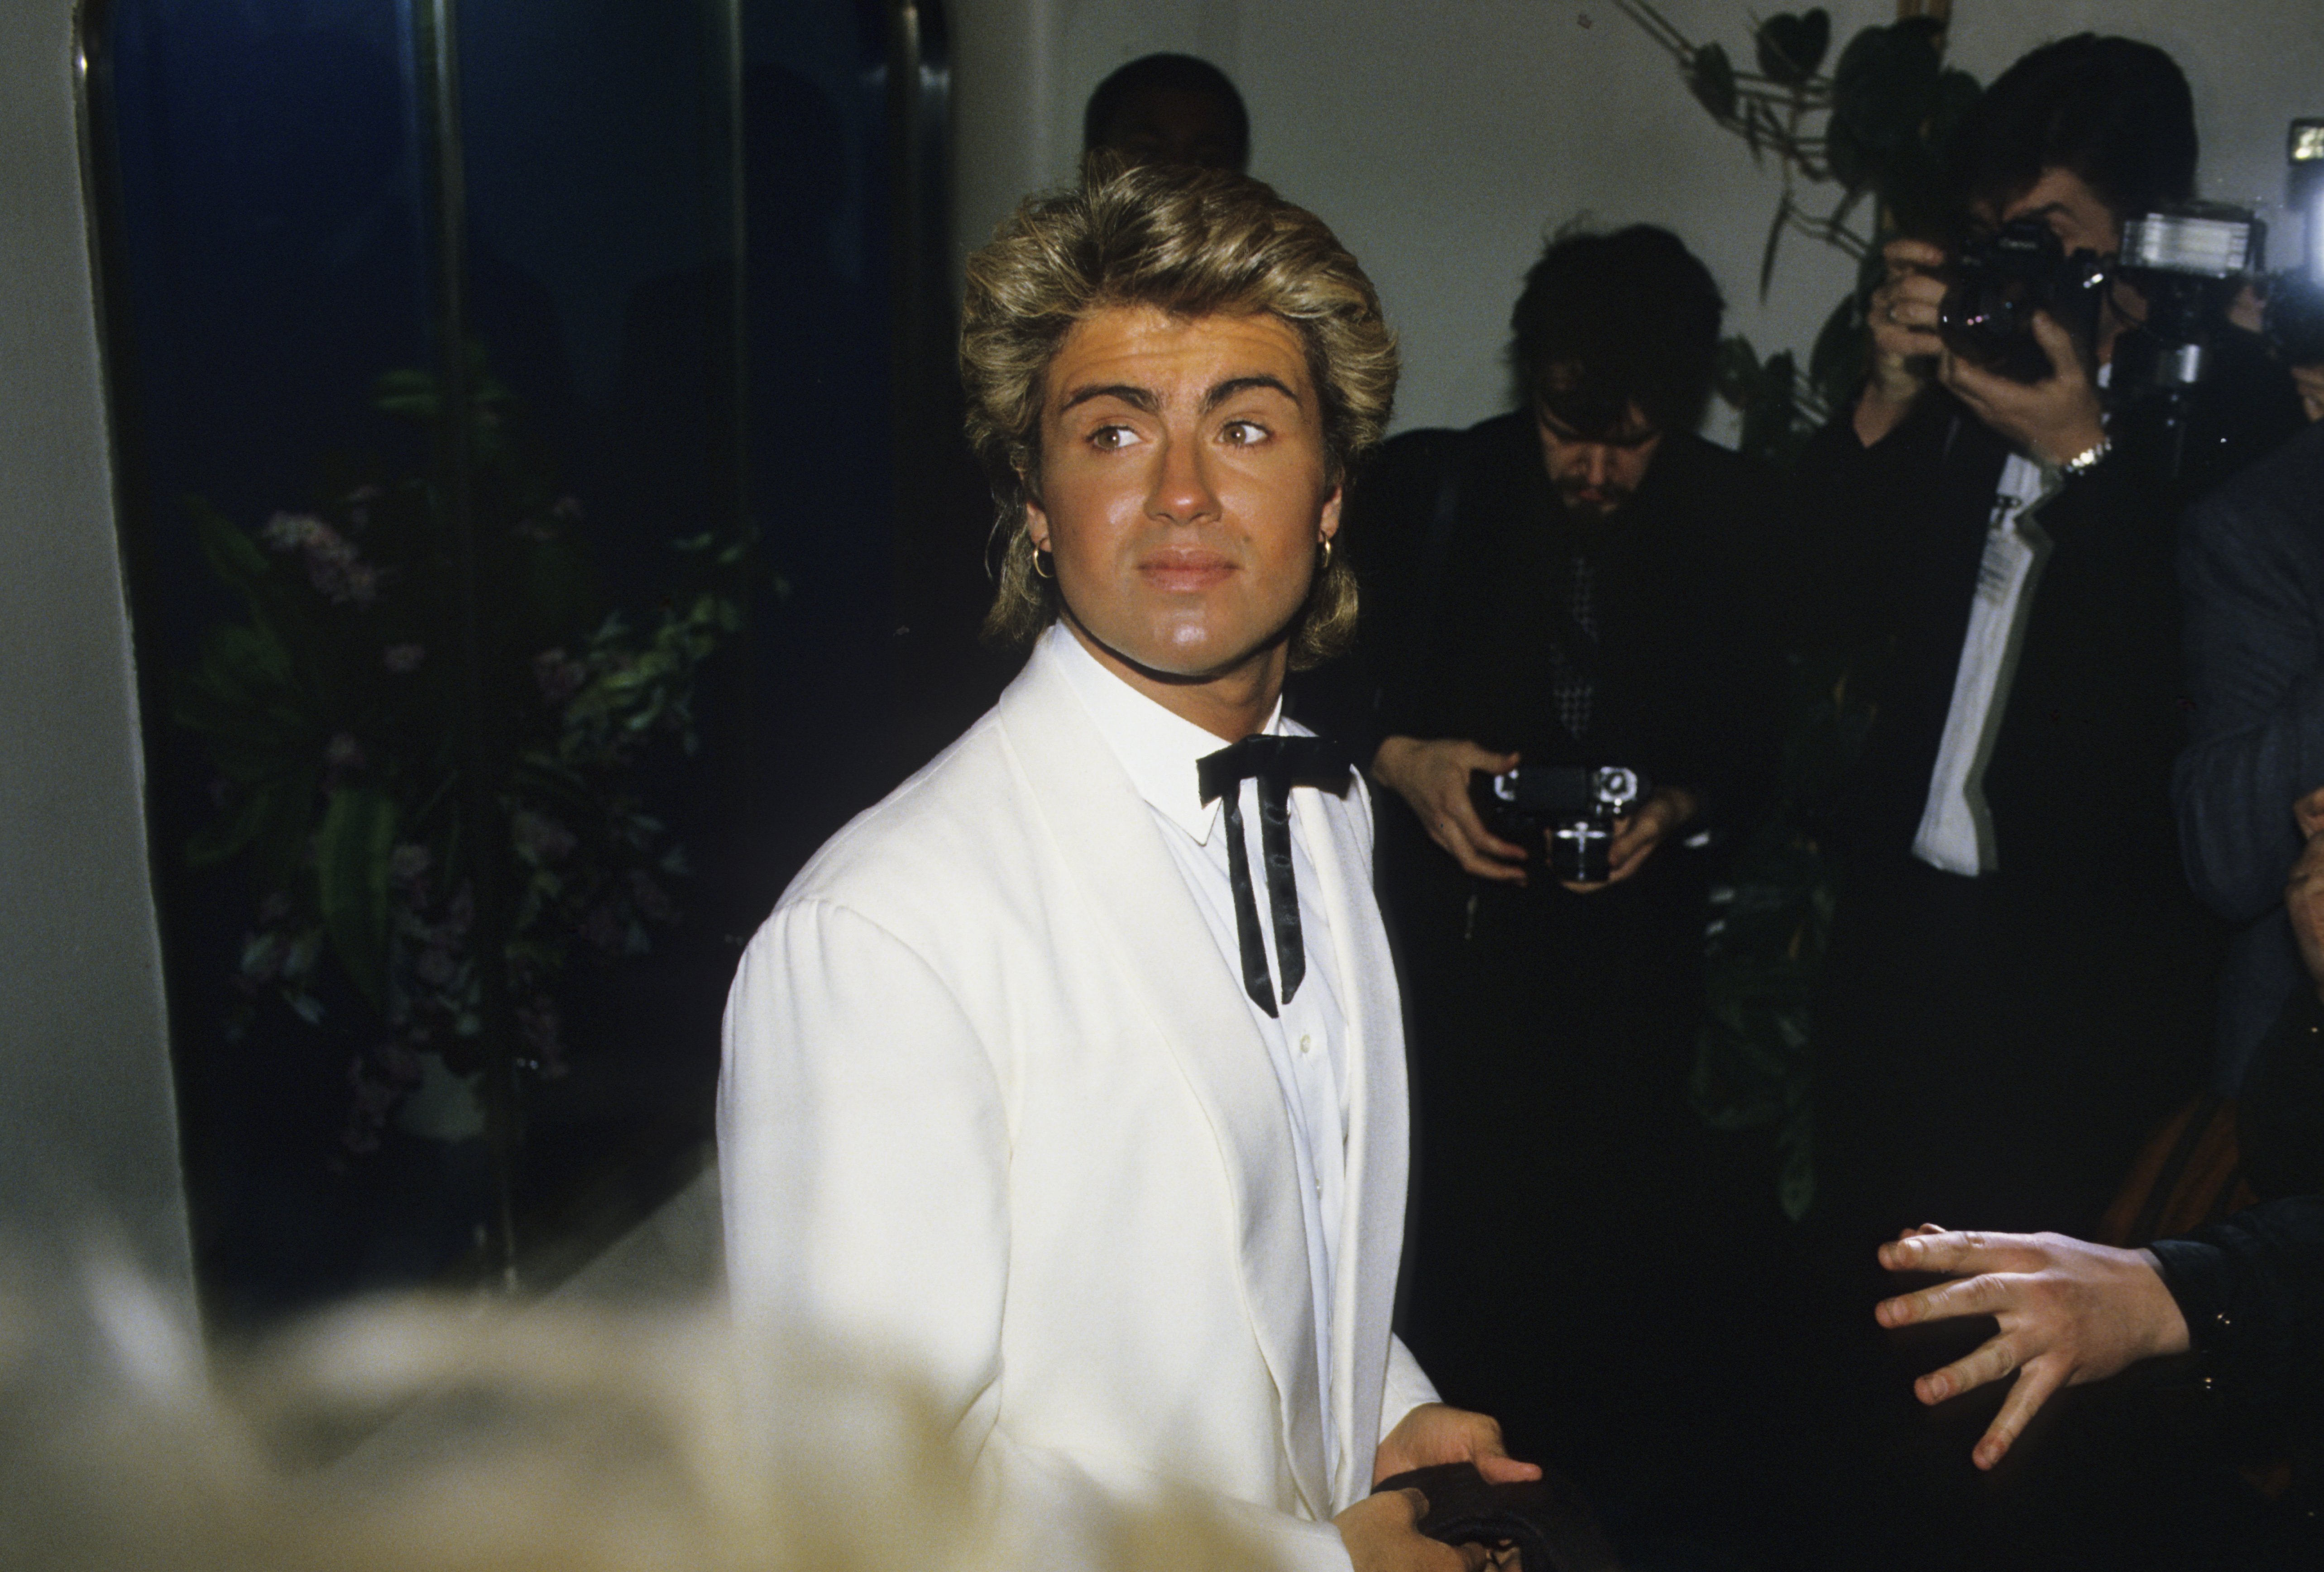 George Michael at the British Record Industry Awards on February 11, 1985. | Source: Getty Images